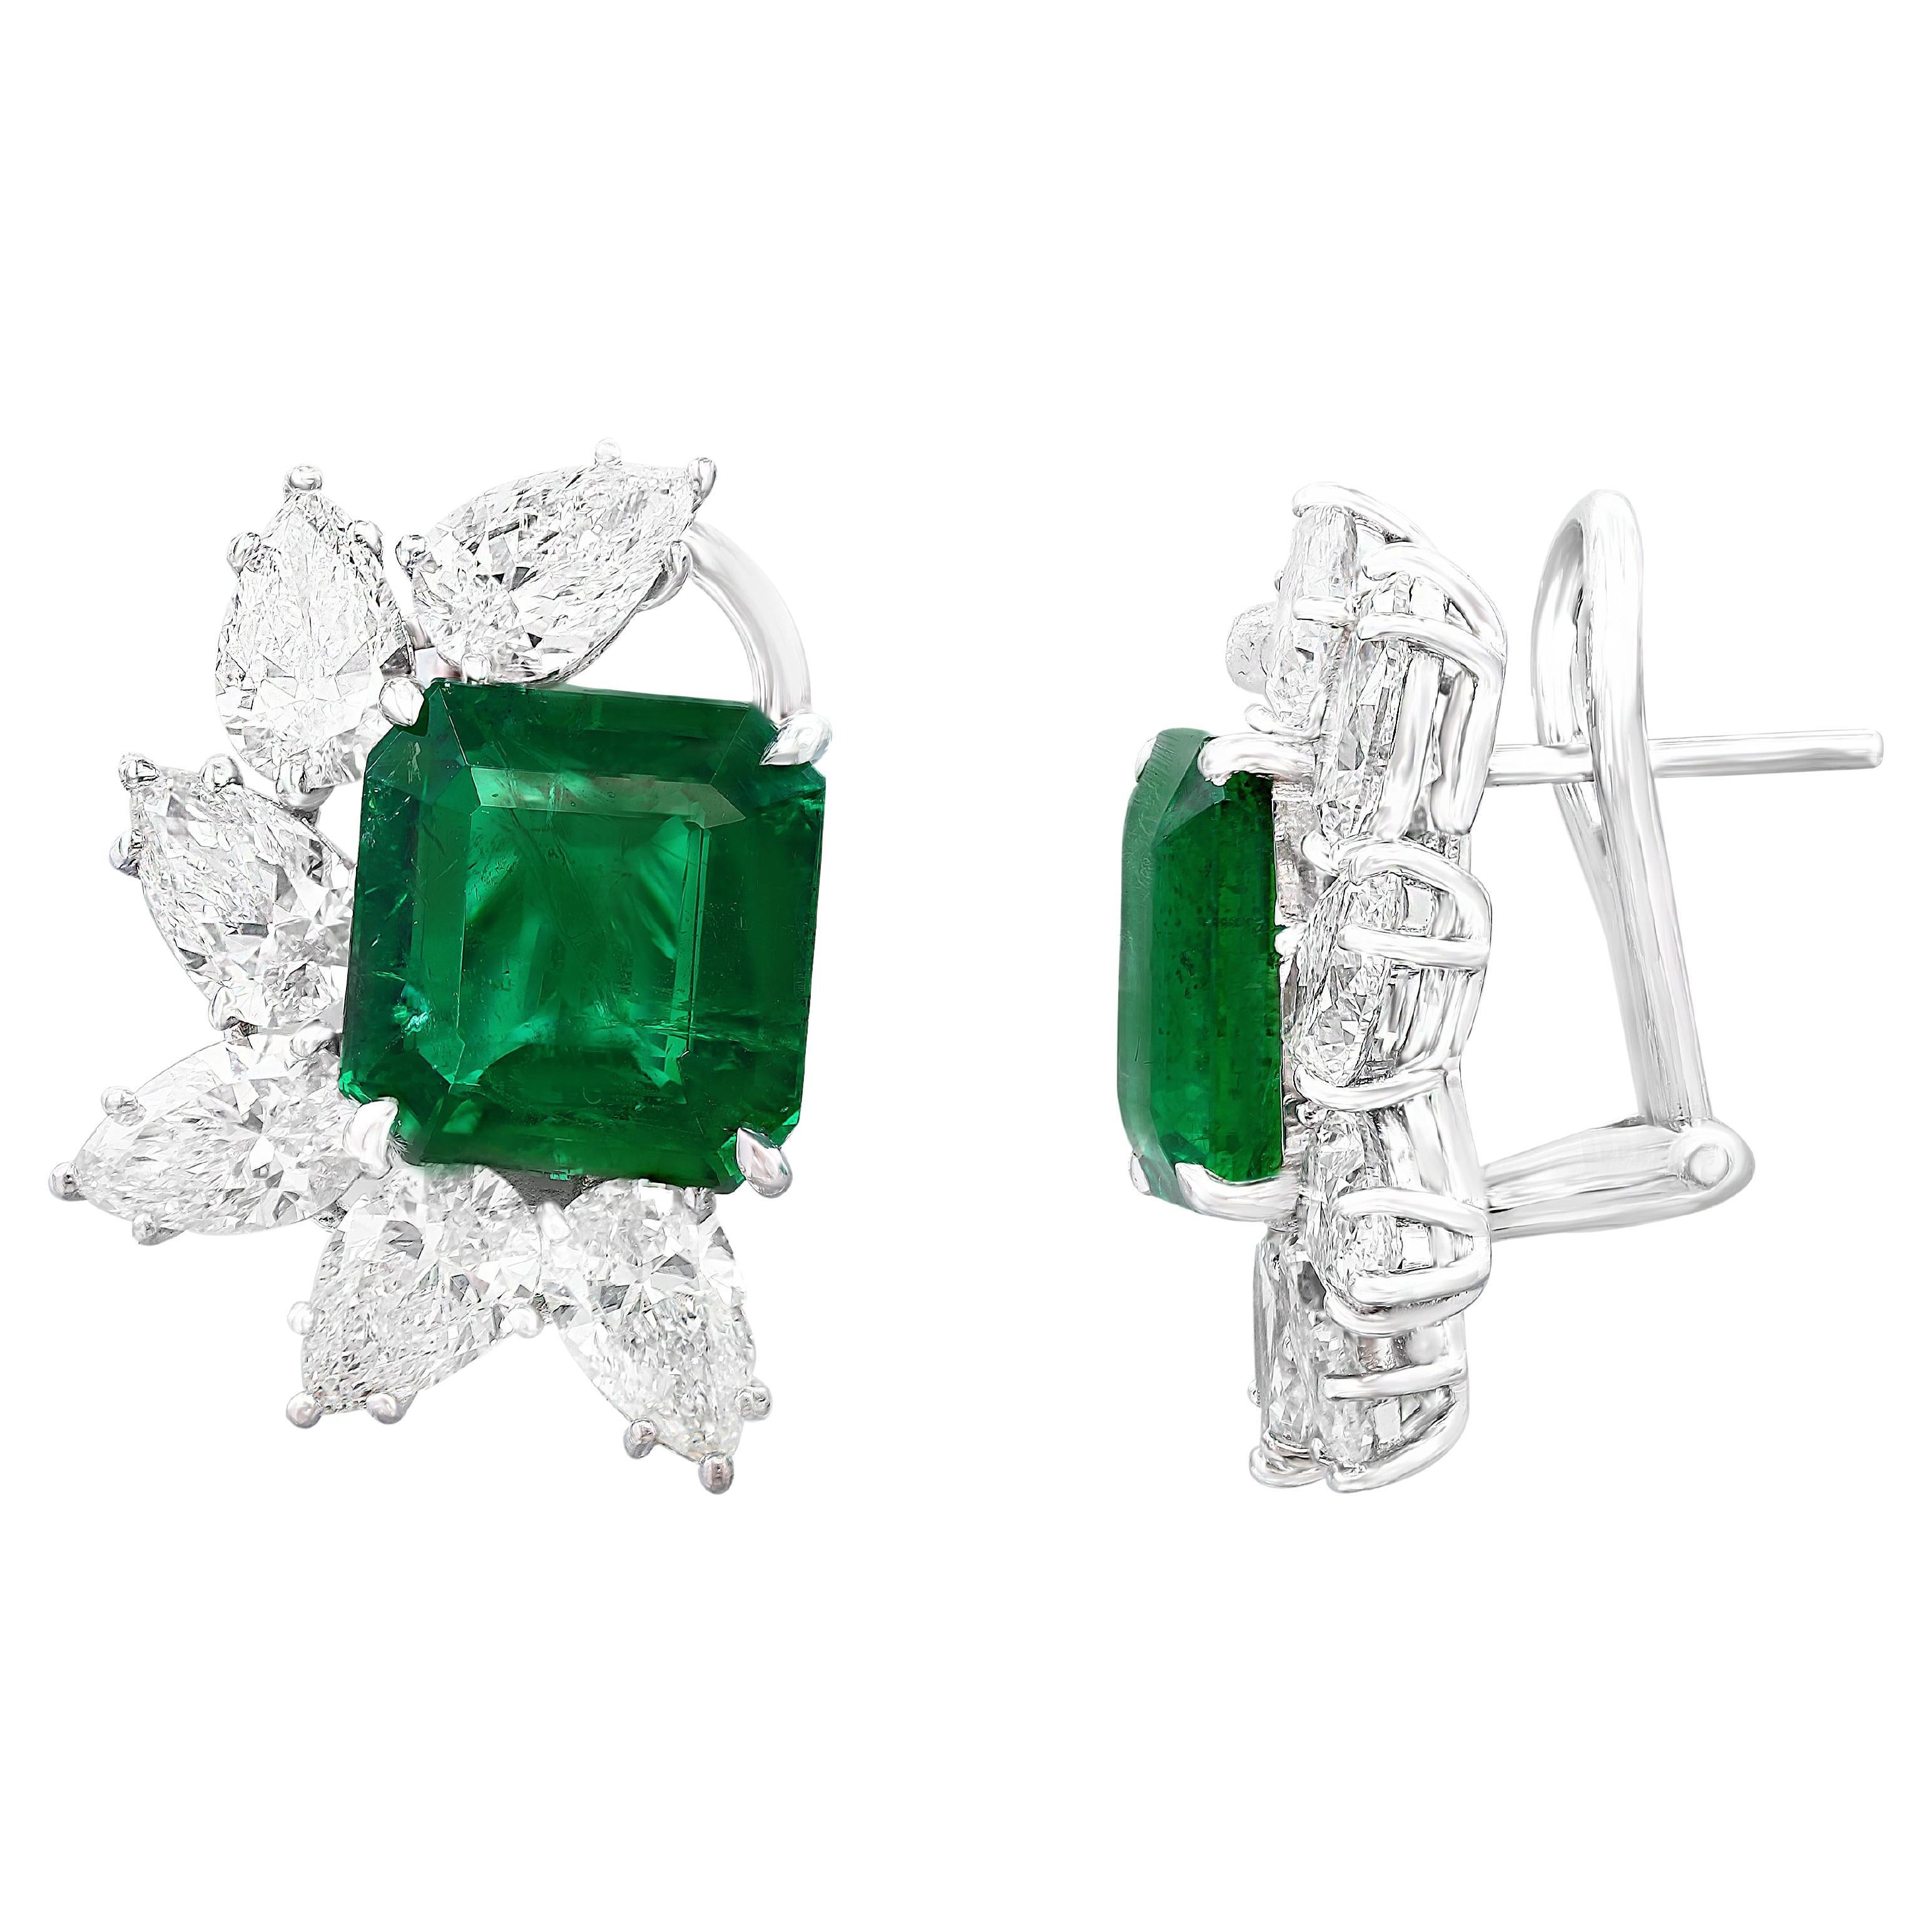 3.2 Carat Emerald and Diamond Cluster Earrings For Sale at 1stDibs ...